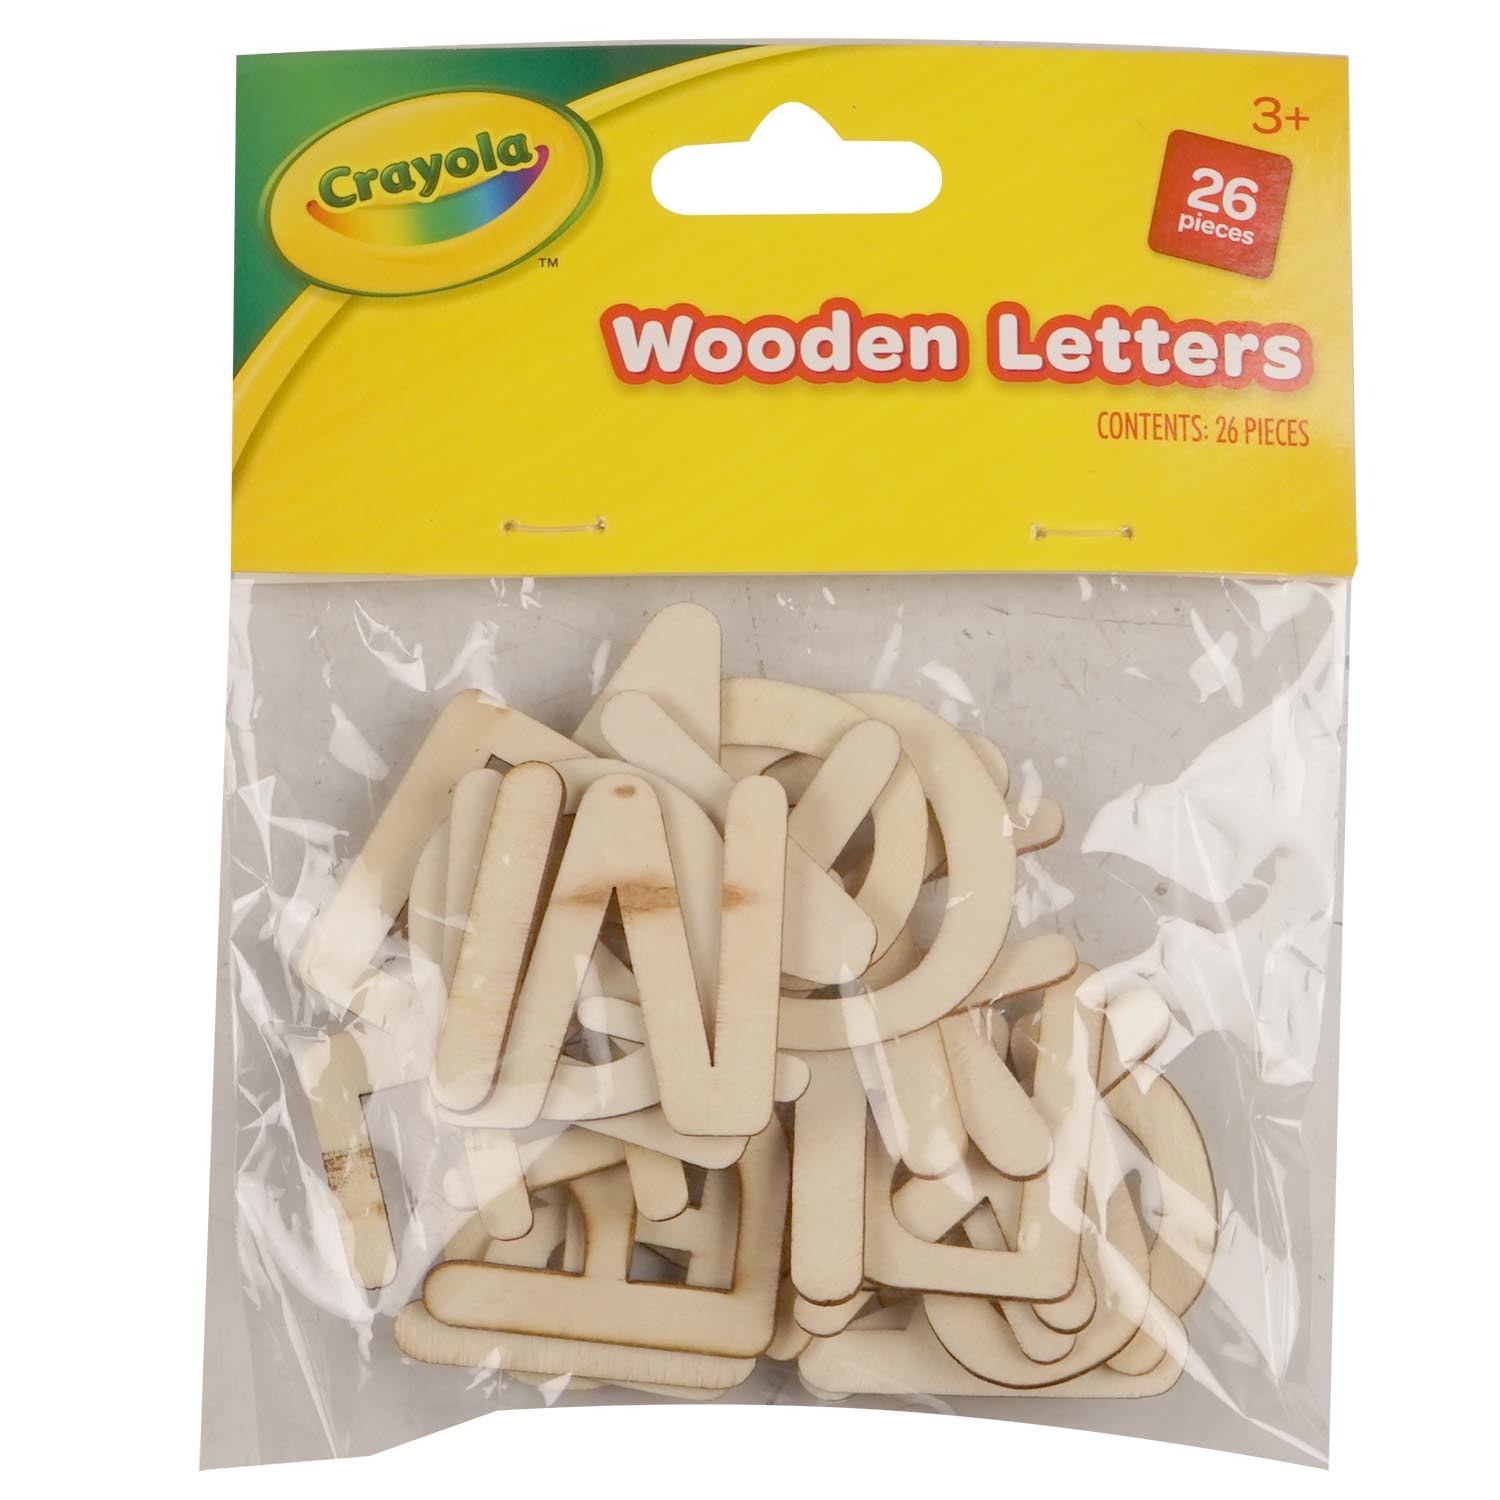 Crayola Wooden Craft Letters Image